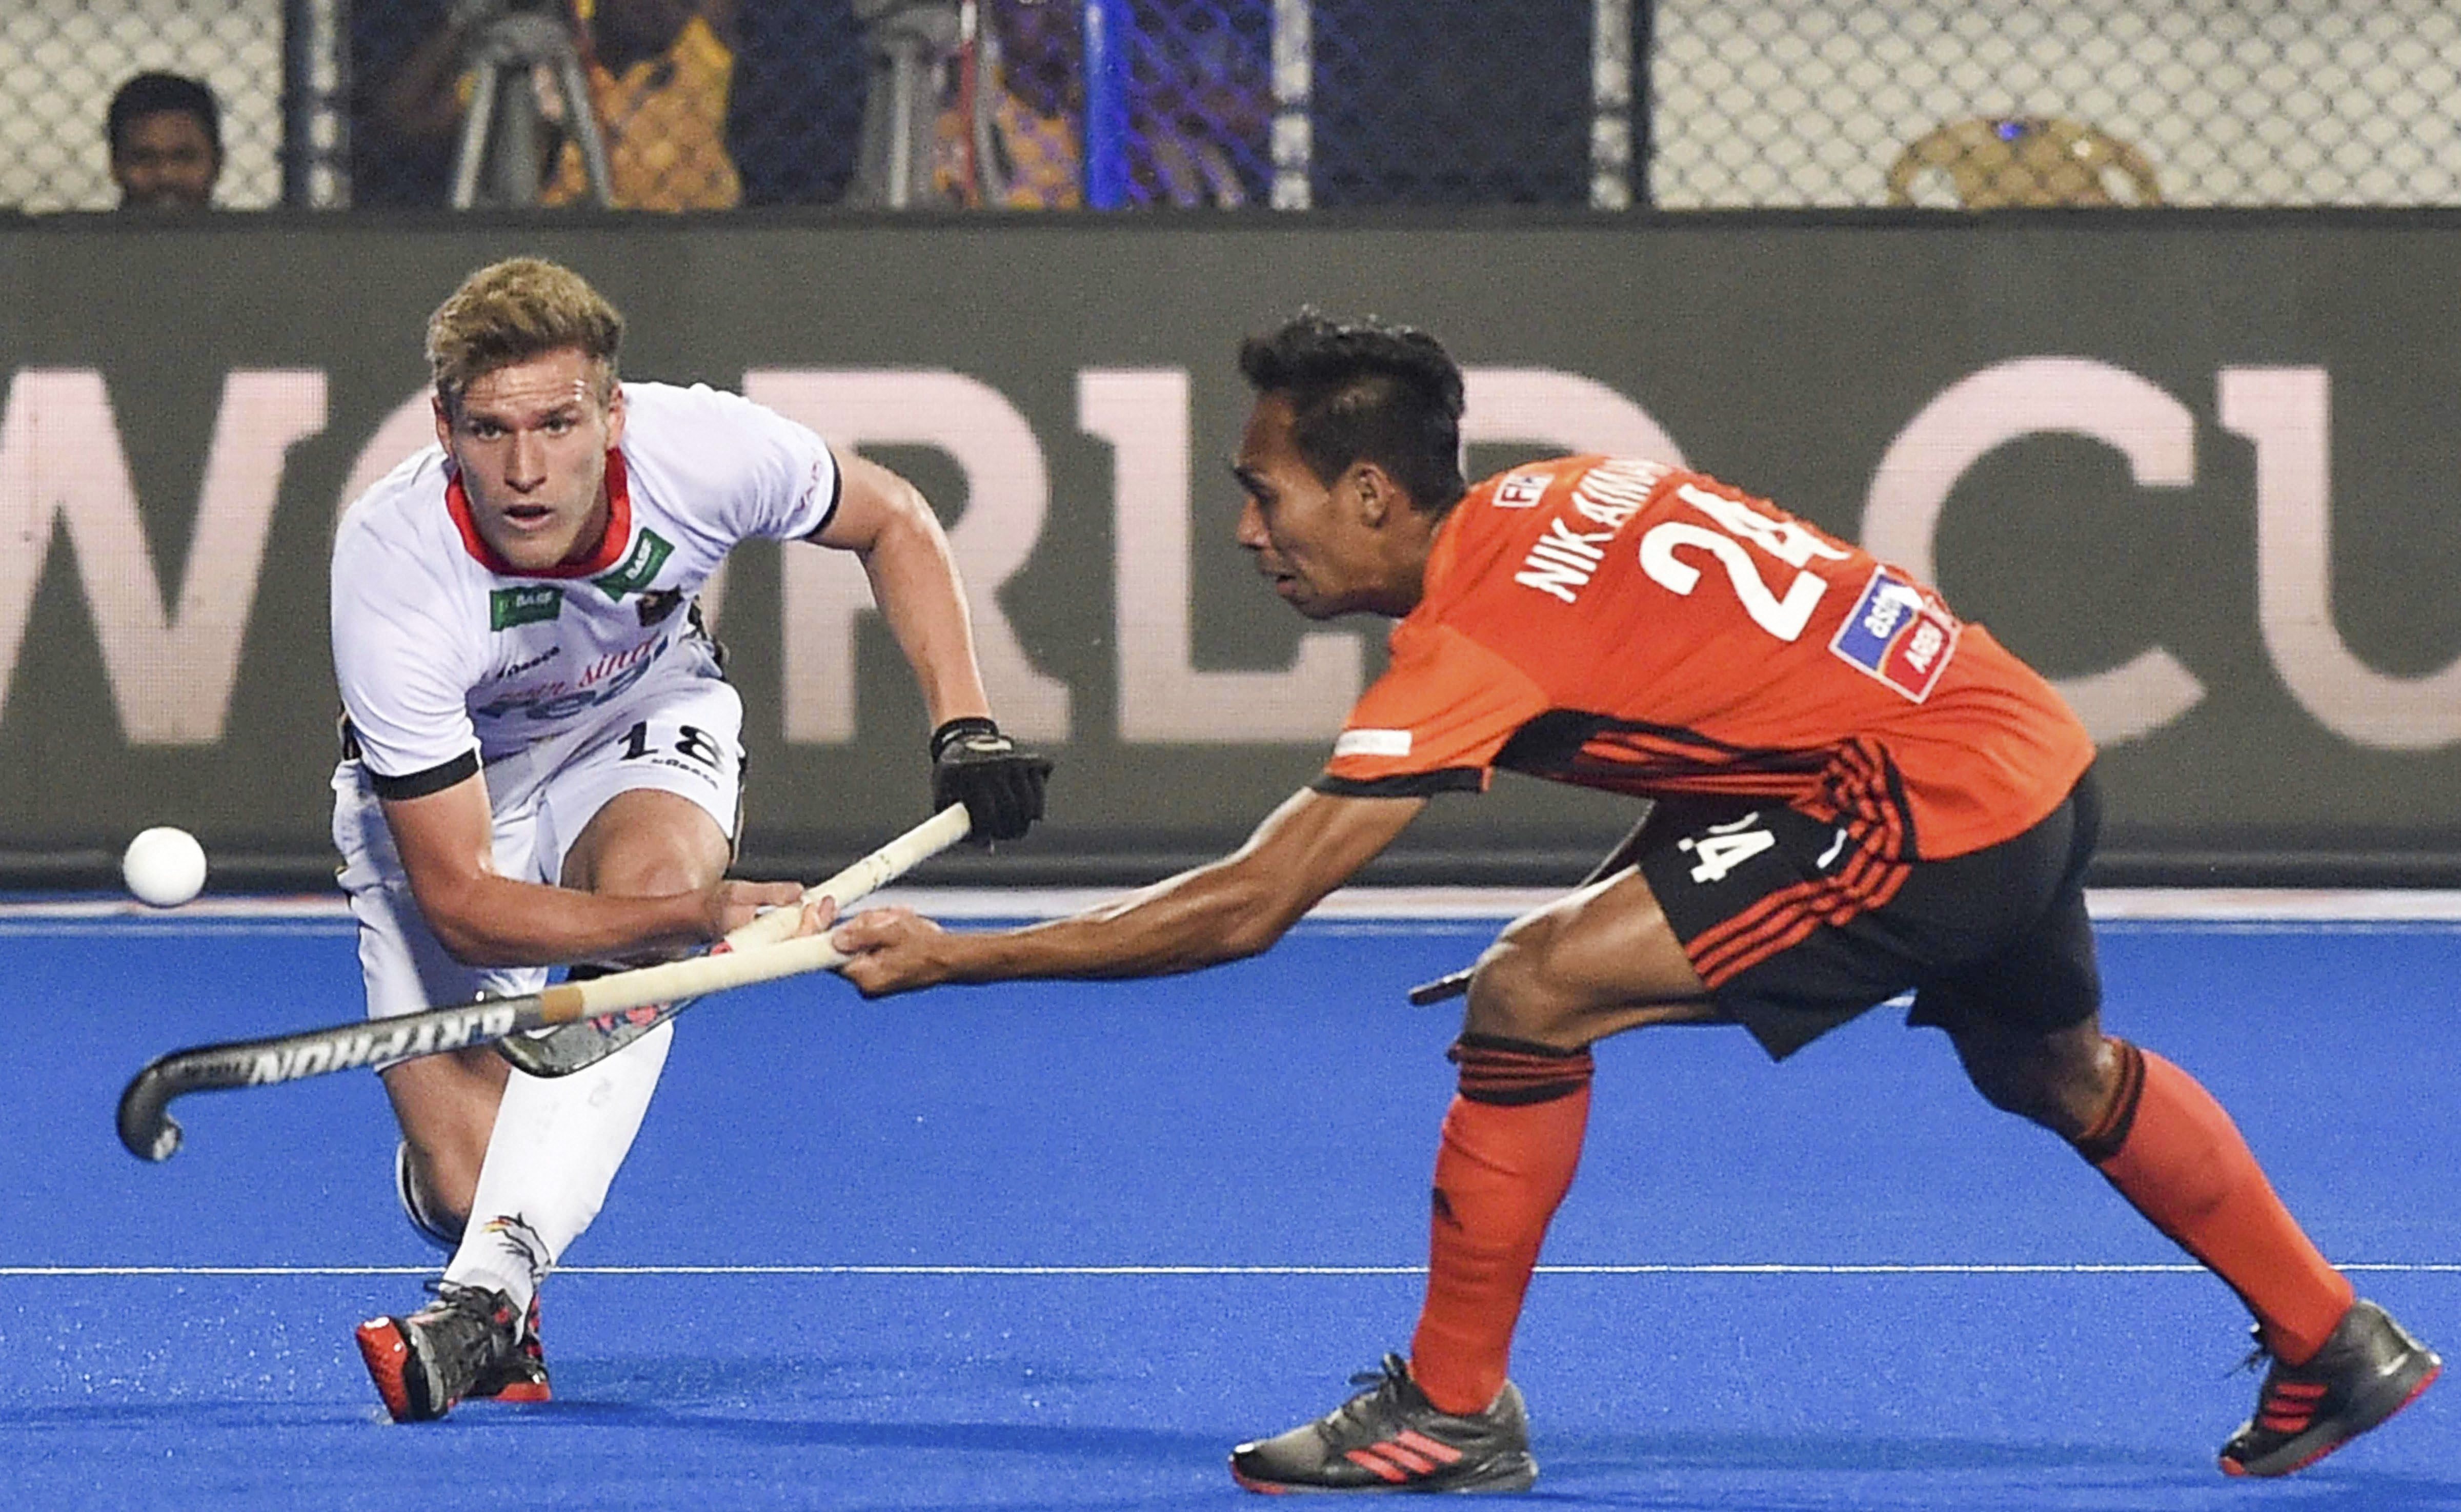 Germany's Ferdinand Weinke (in white) and Malaysia's Aiman Rozemi vie for the ball during their match, at Men's Hockey World Cup 2018, in Bhubaneswar - PTI